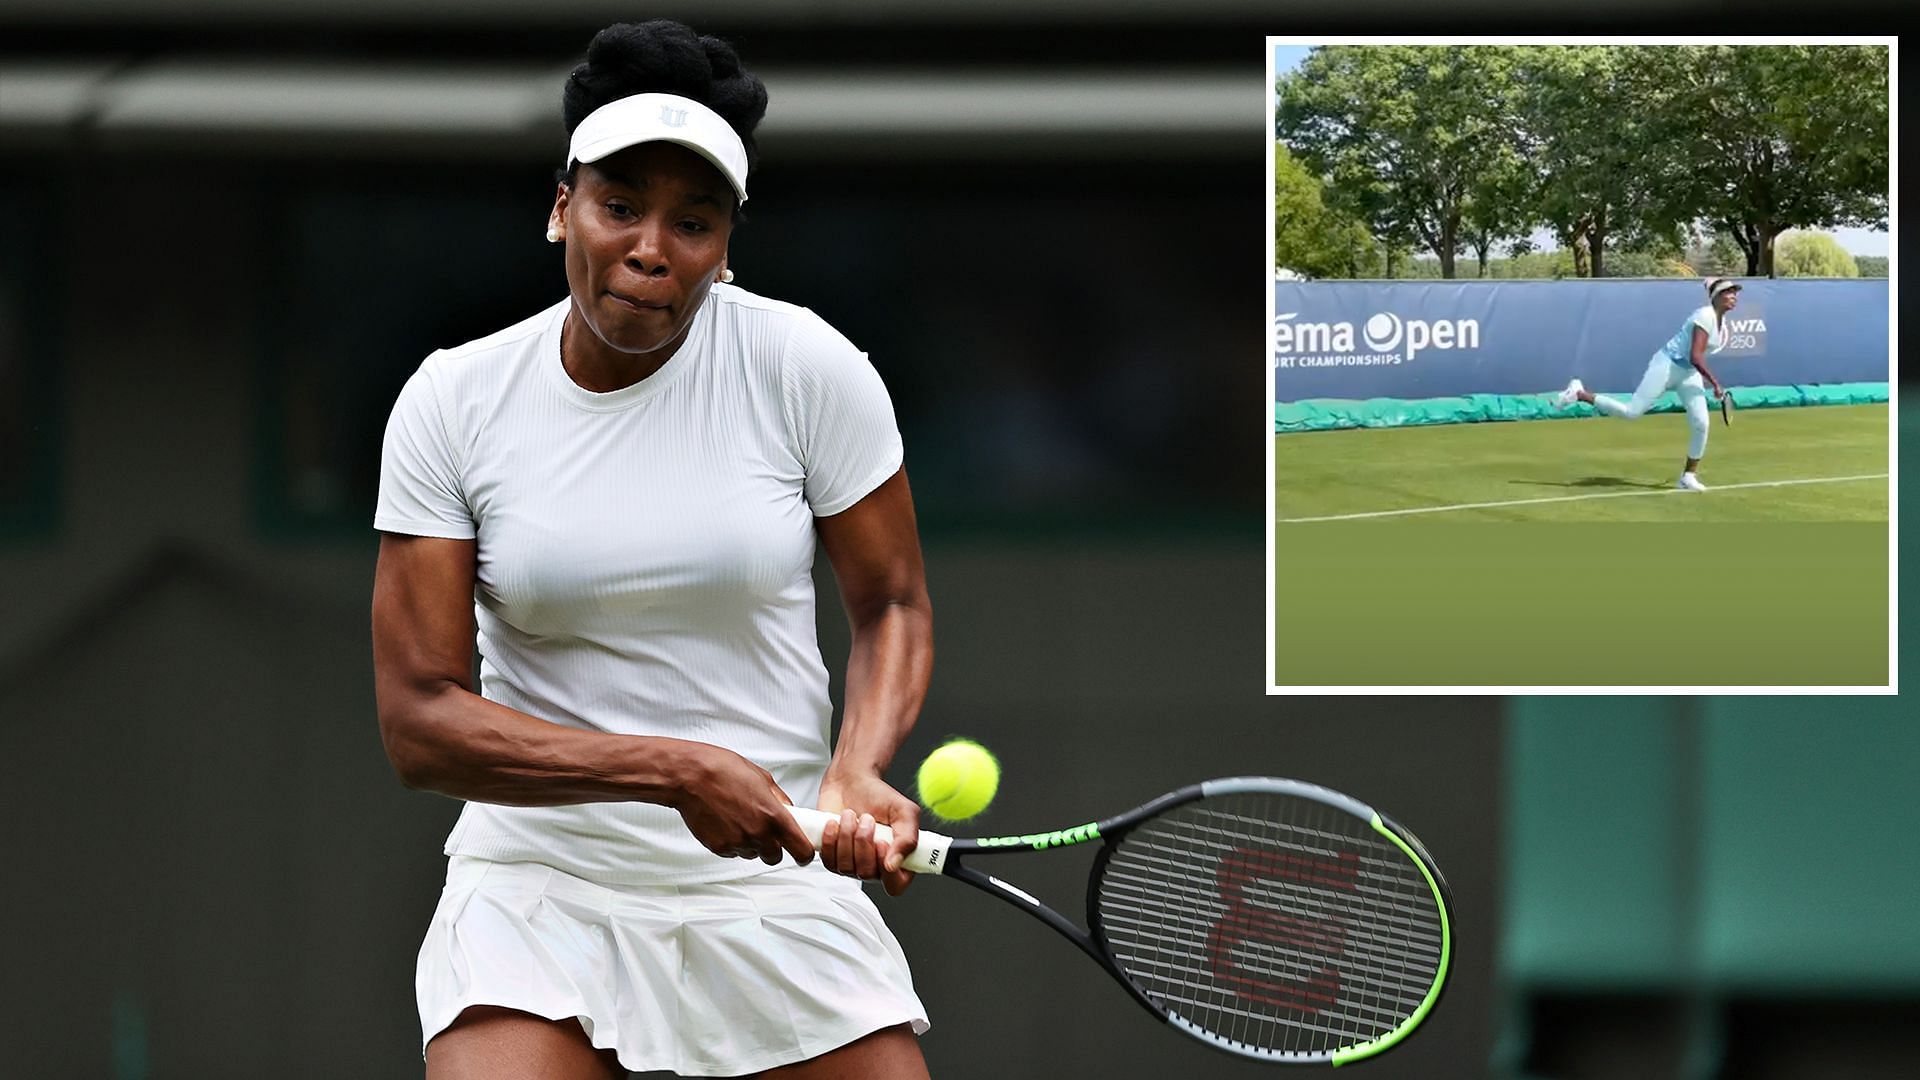 Venus Williams will compete at the 2023 Libema Open for the first time